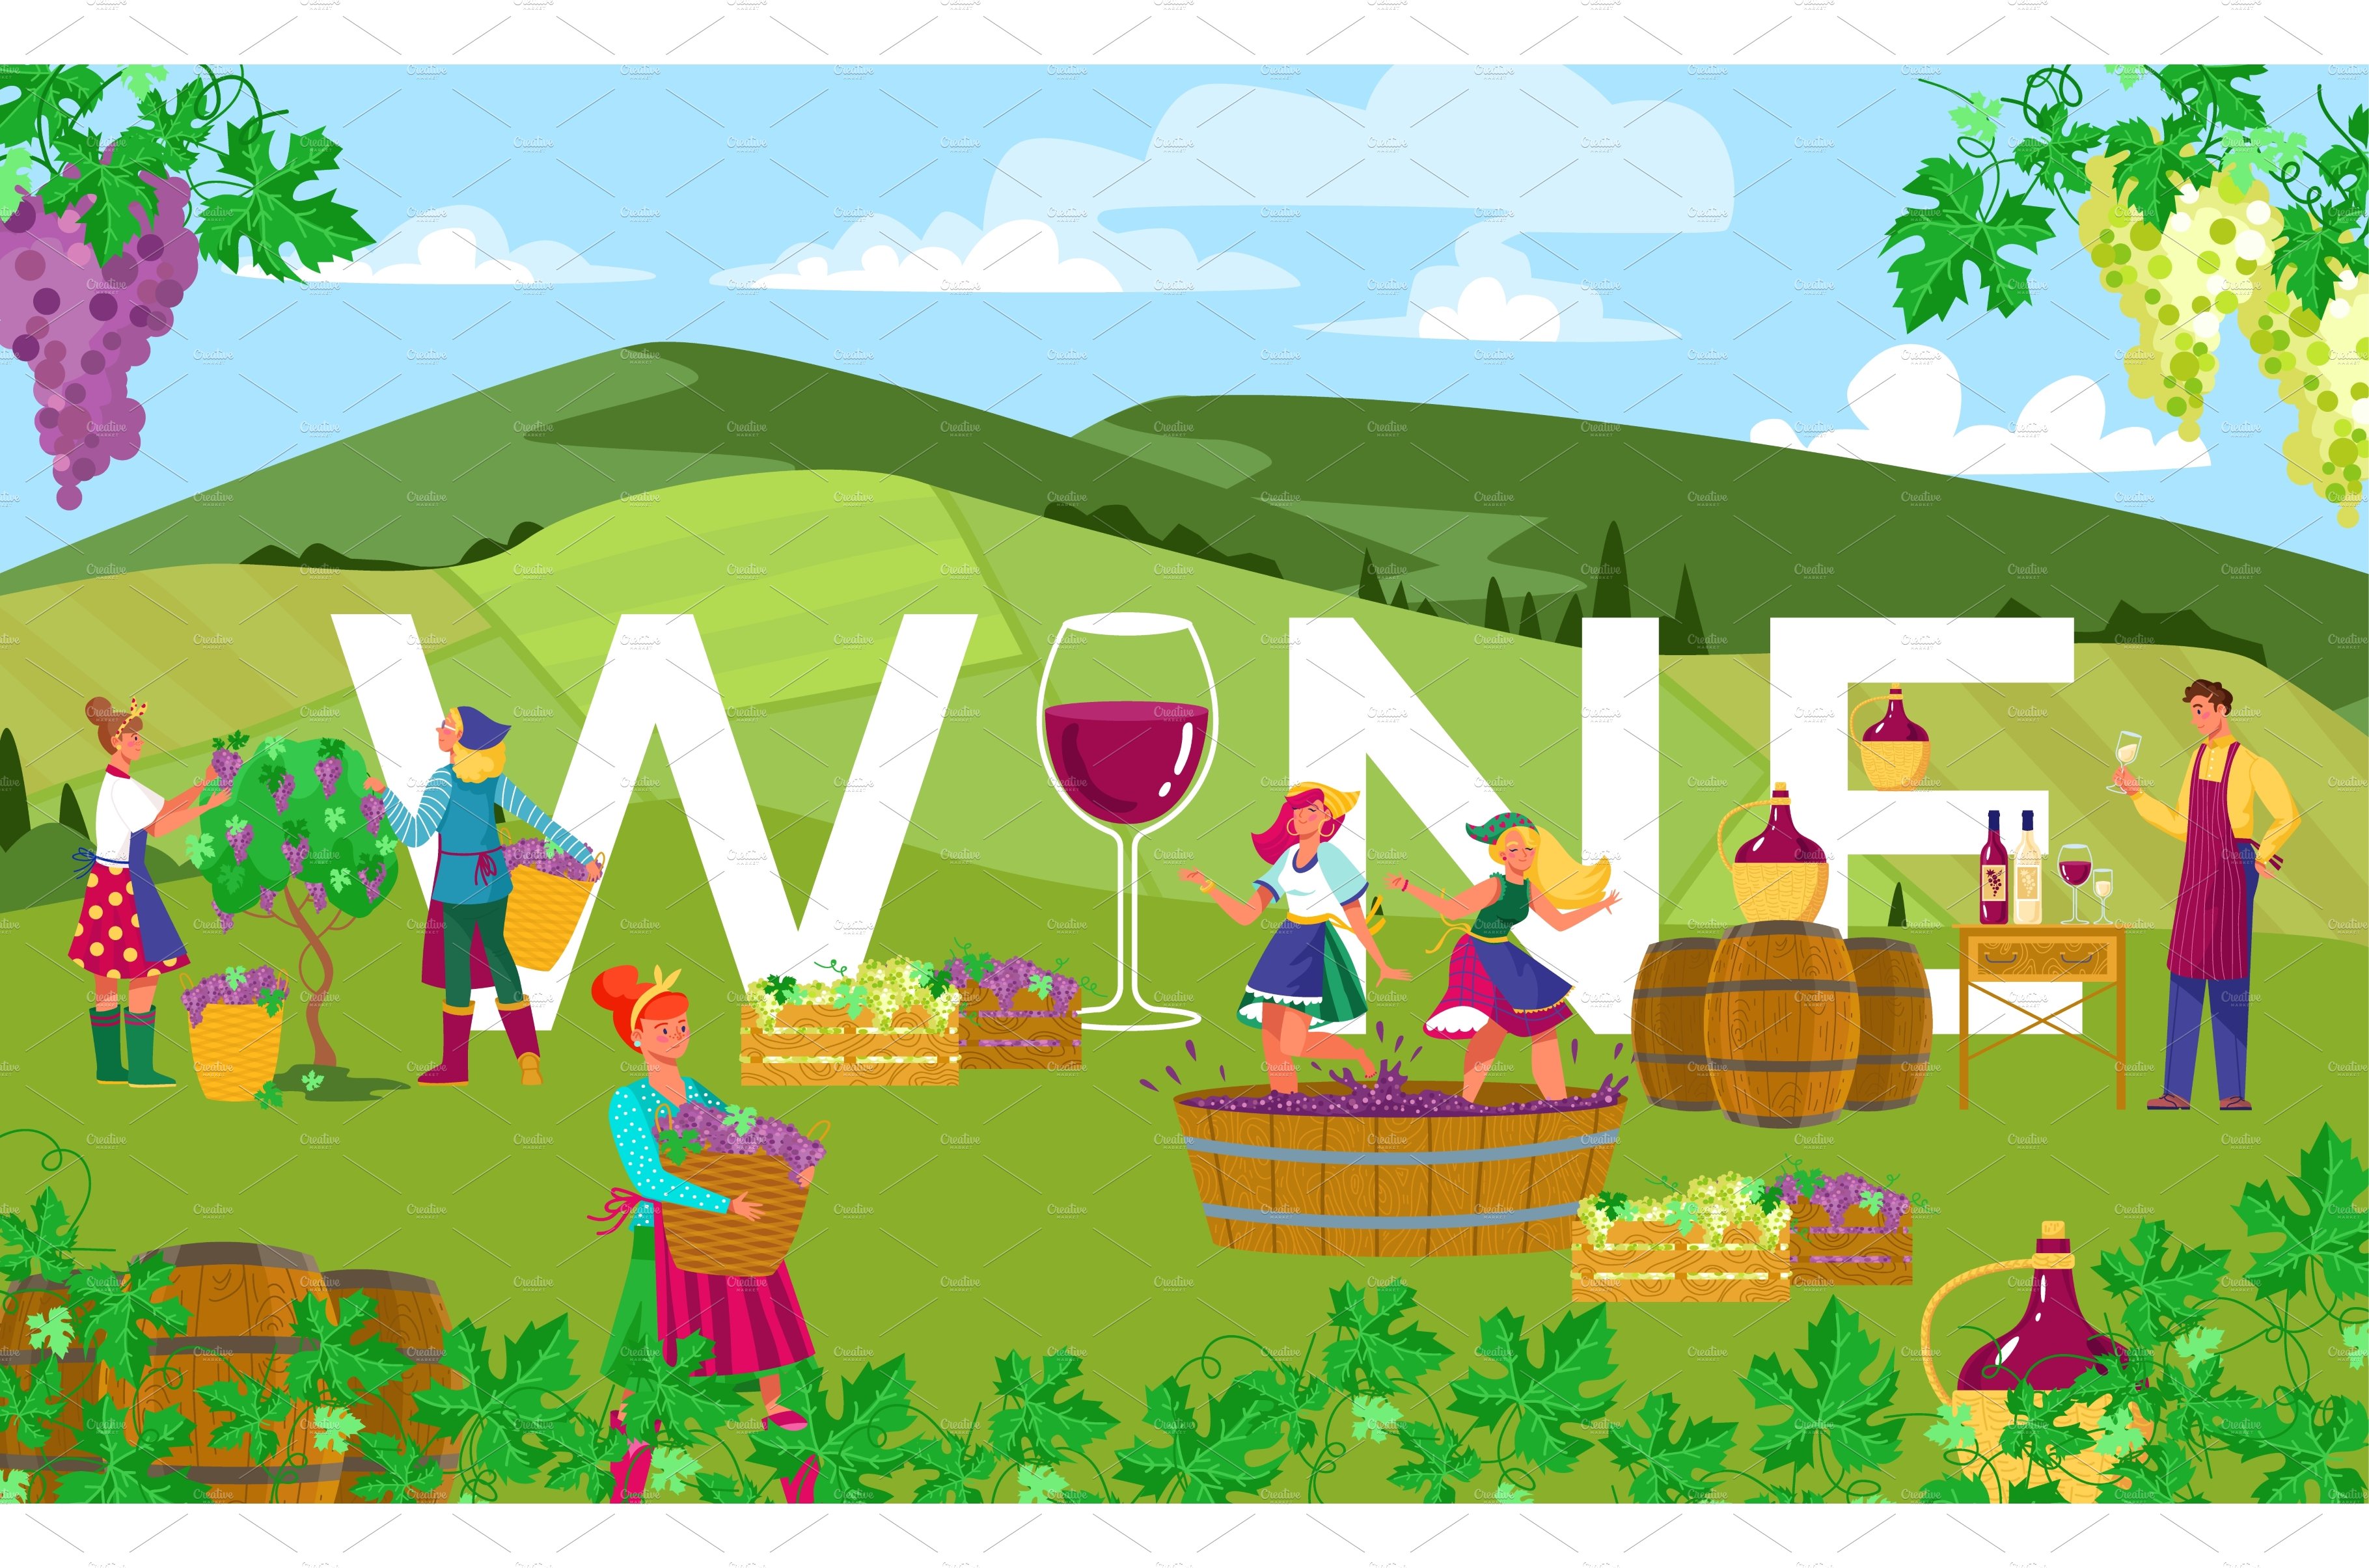 Production wine in countryside cover image.